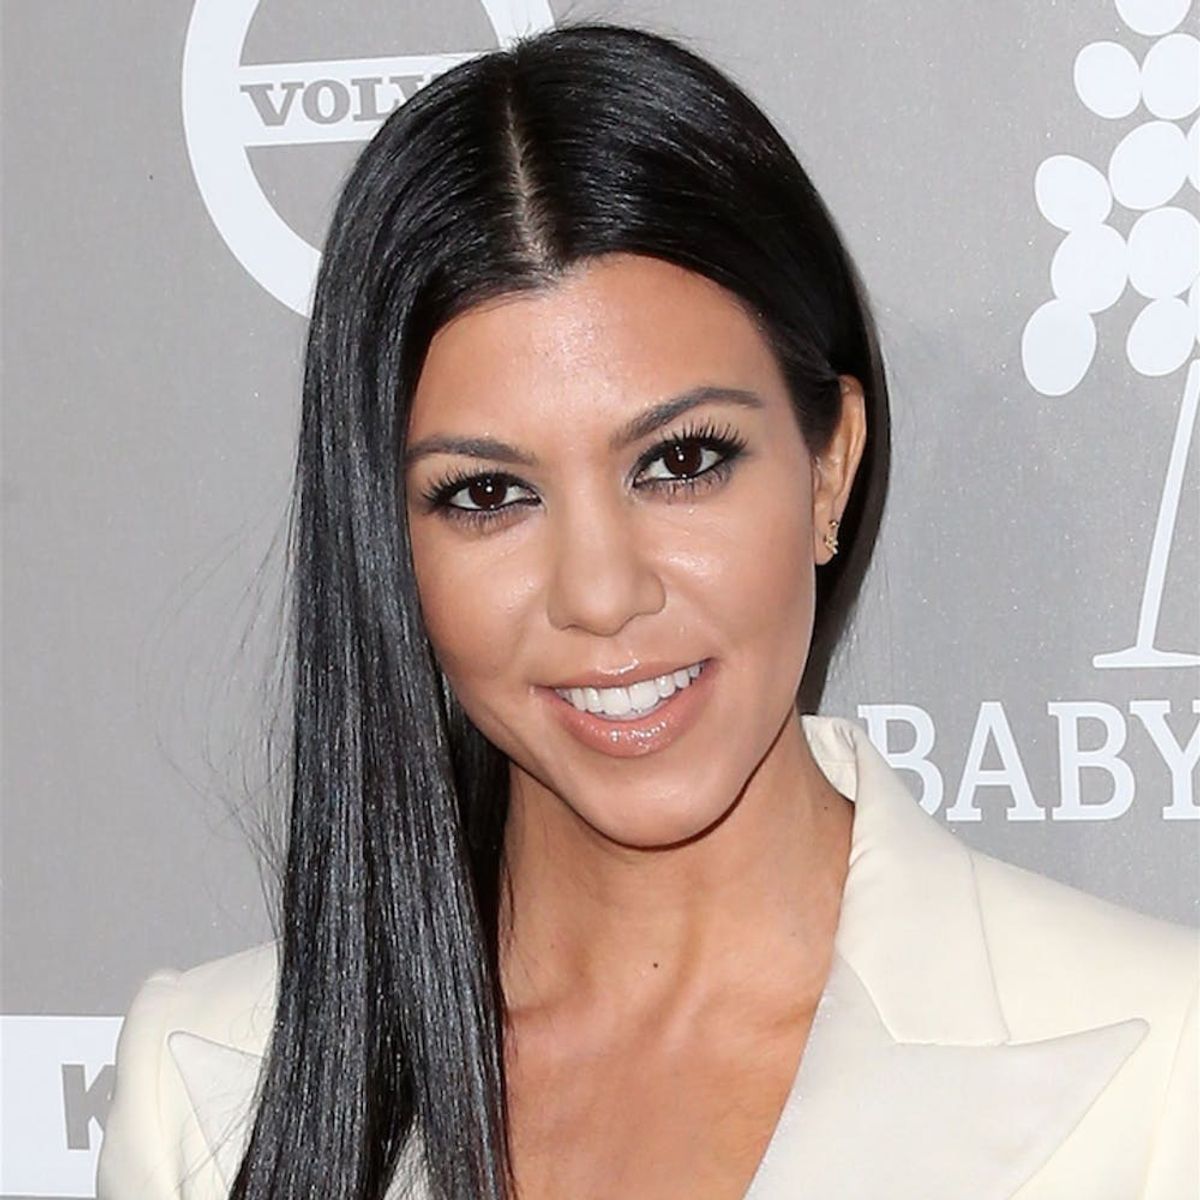 You’ll Totally Relate to Kourtney Kardashian’s REAL Reason for Working Out